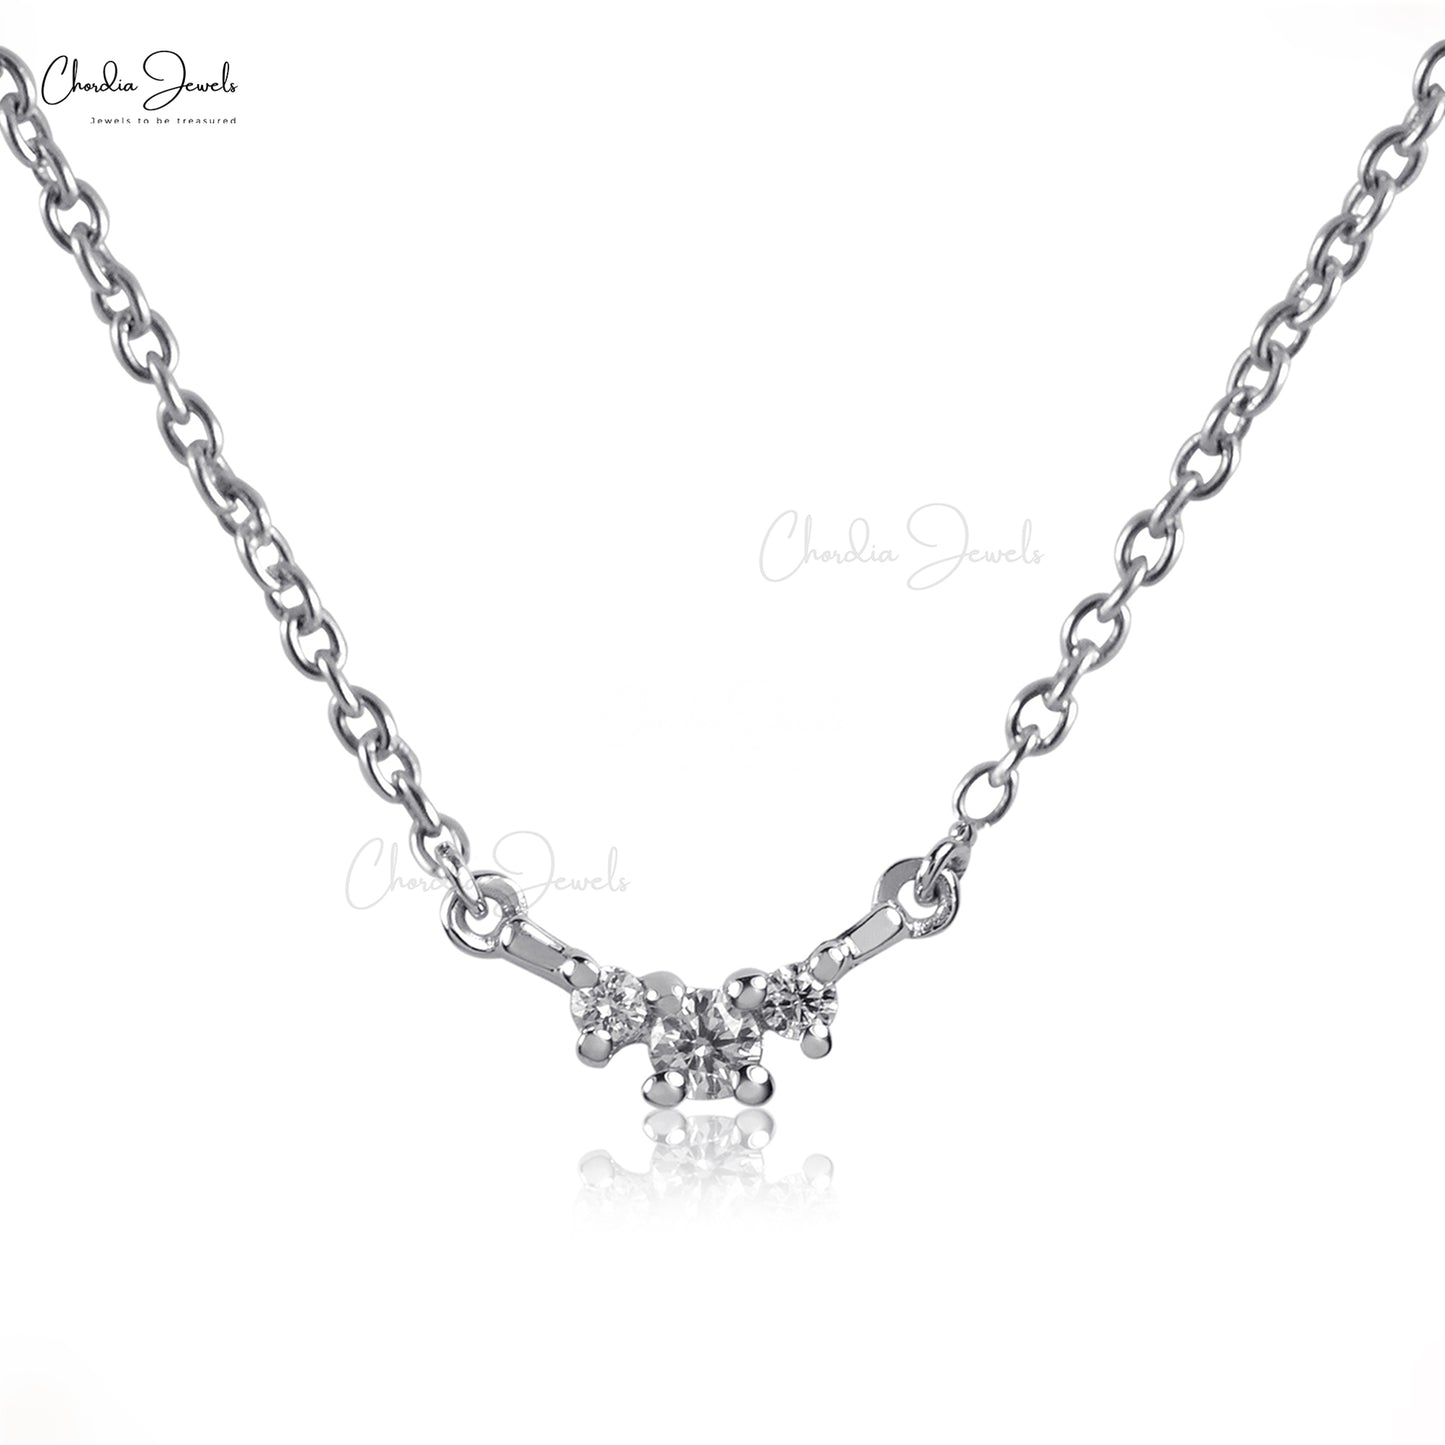 Minimalist Three-Stone Diamond Necklace in 14k White Gold for Her